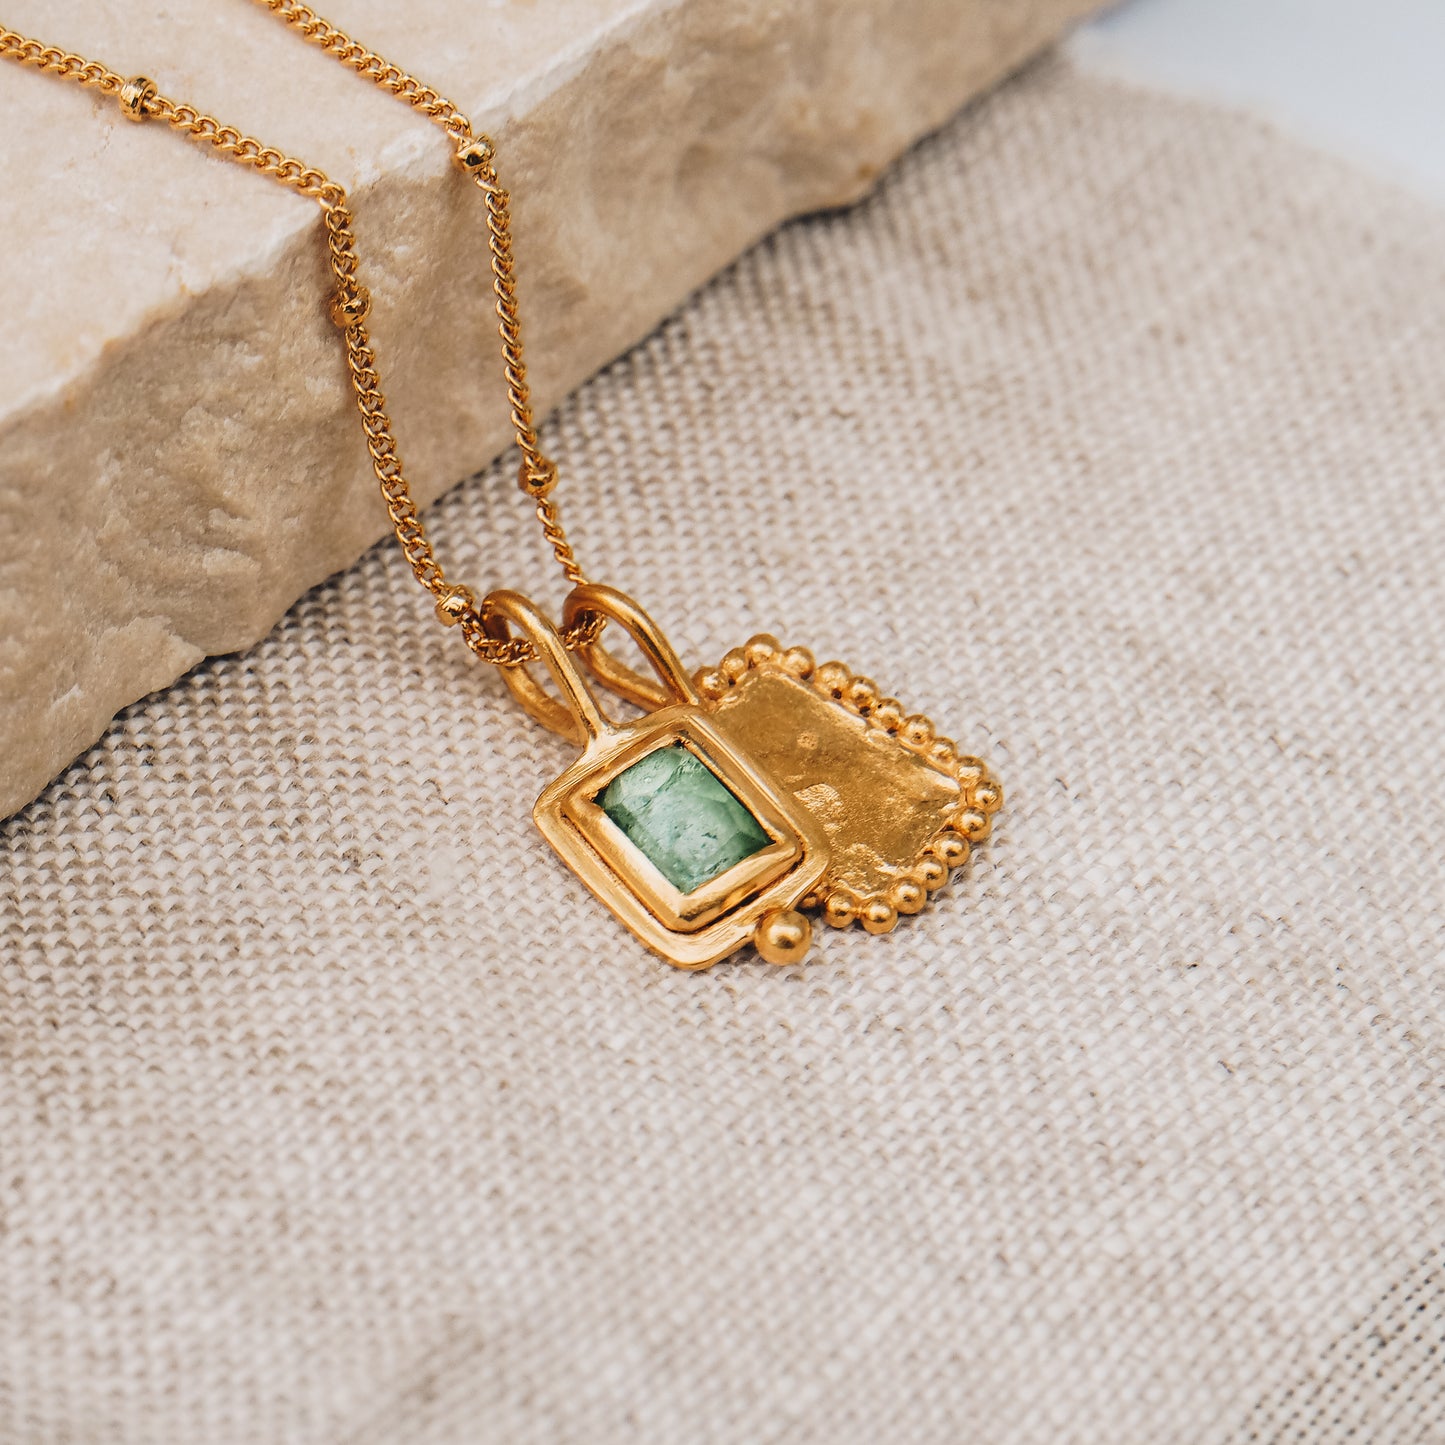 Artisan-crafted square gold pendant showcasing a stunning blue rose cut tourmaline gemstone and exquisite granulation work, hanging from a delicate satellite chain.